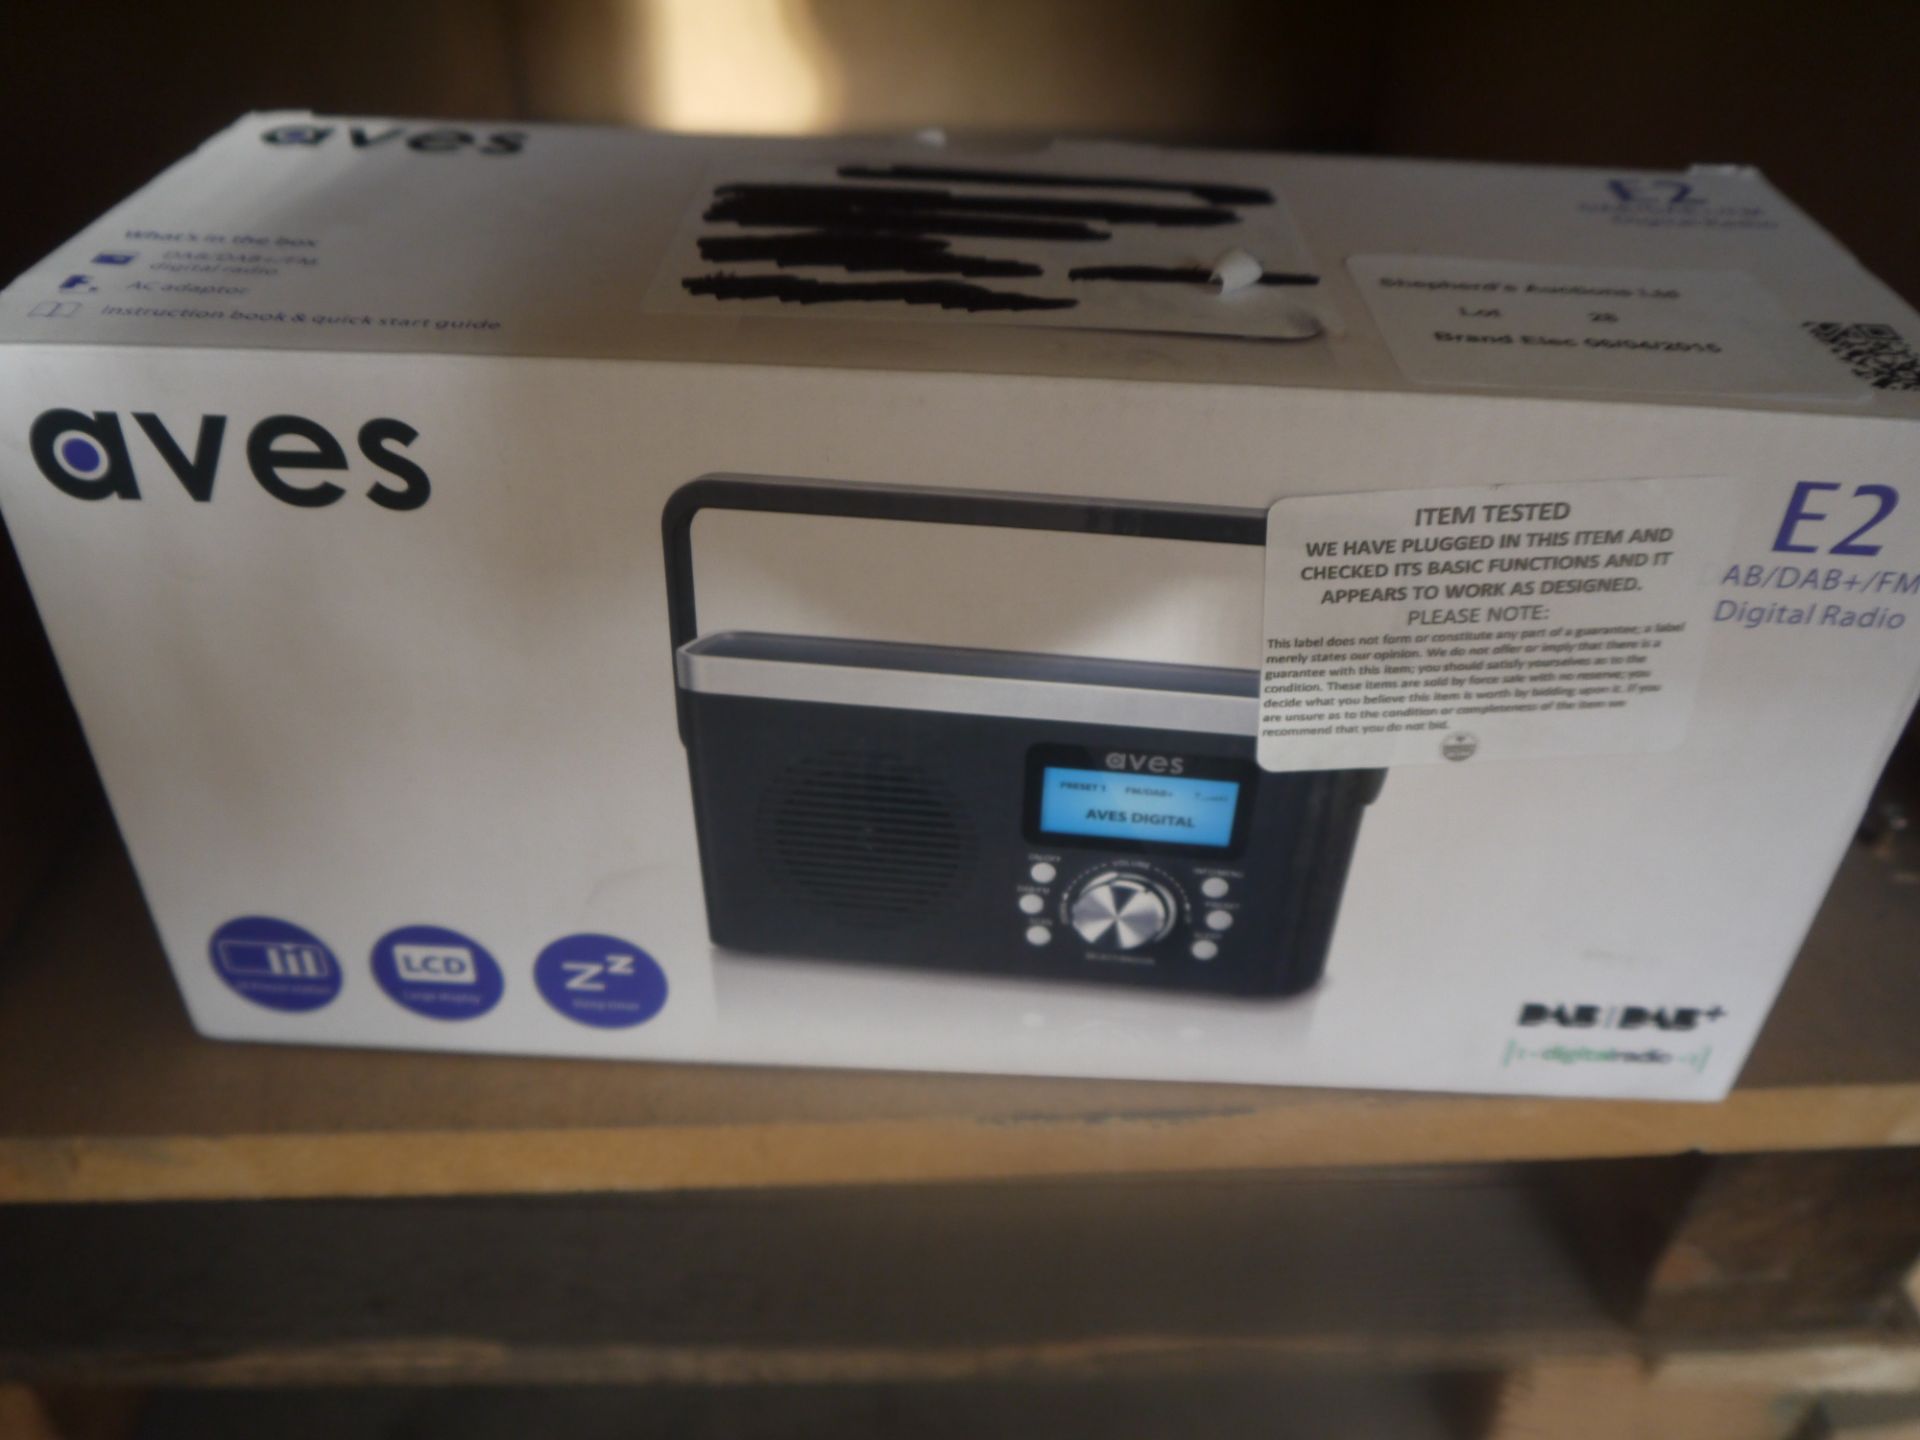 Aves E2 Digital radio tested working and boxed